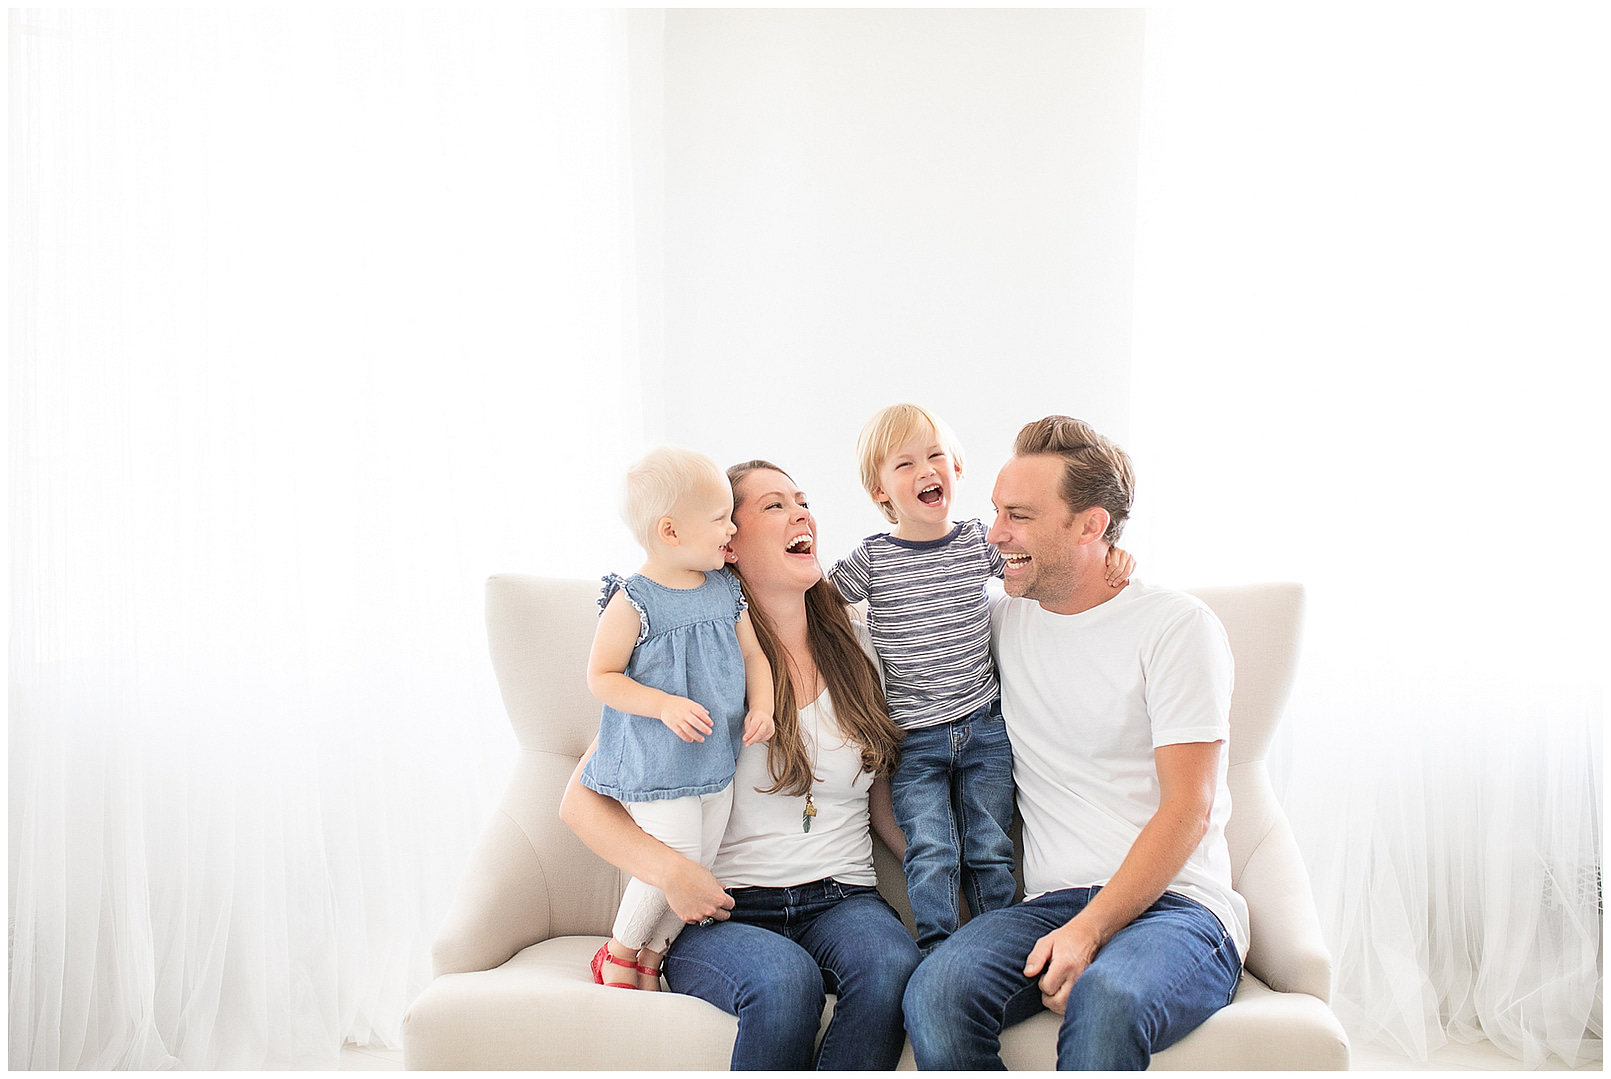 Family laughs together in Boise studio session. Photos by Tiffany Hix Photography.